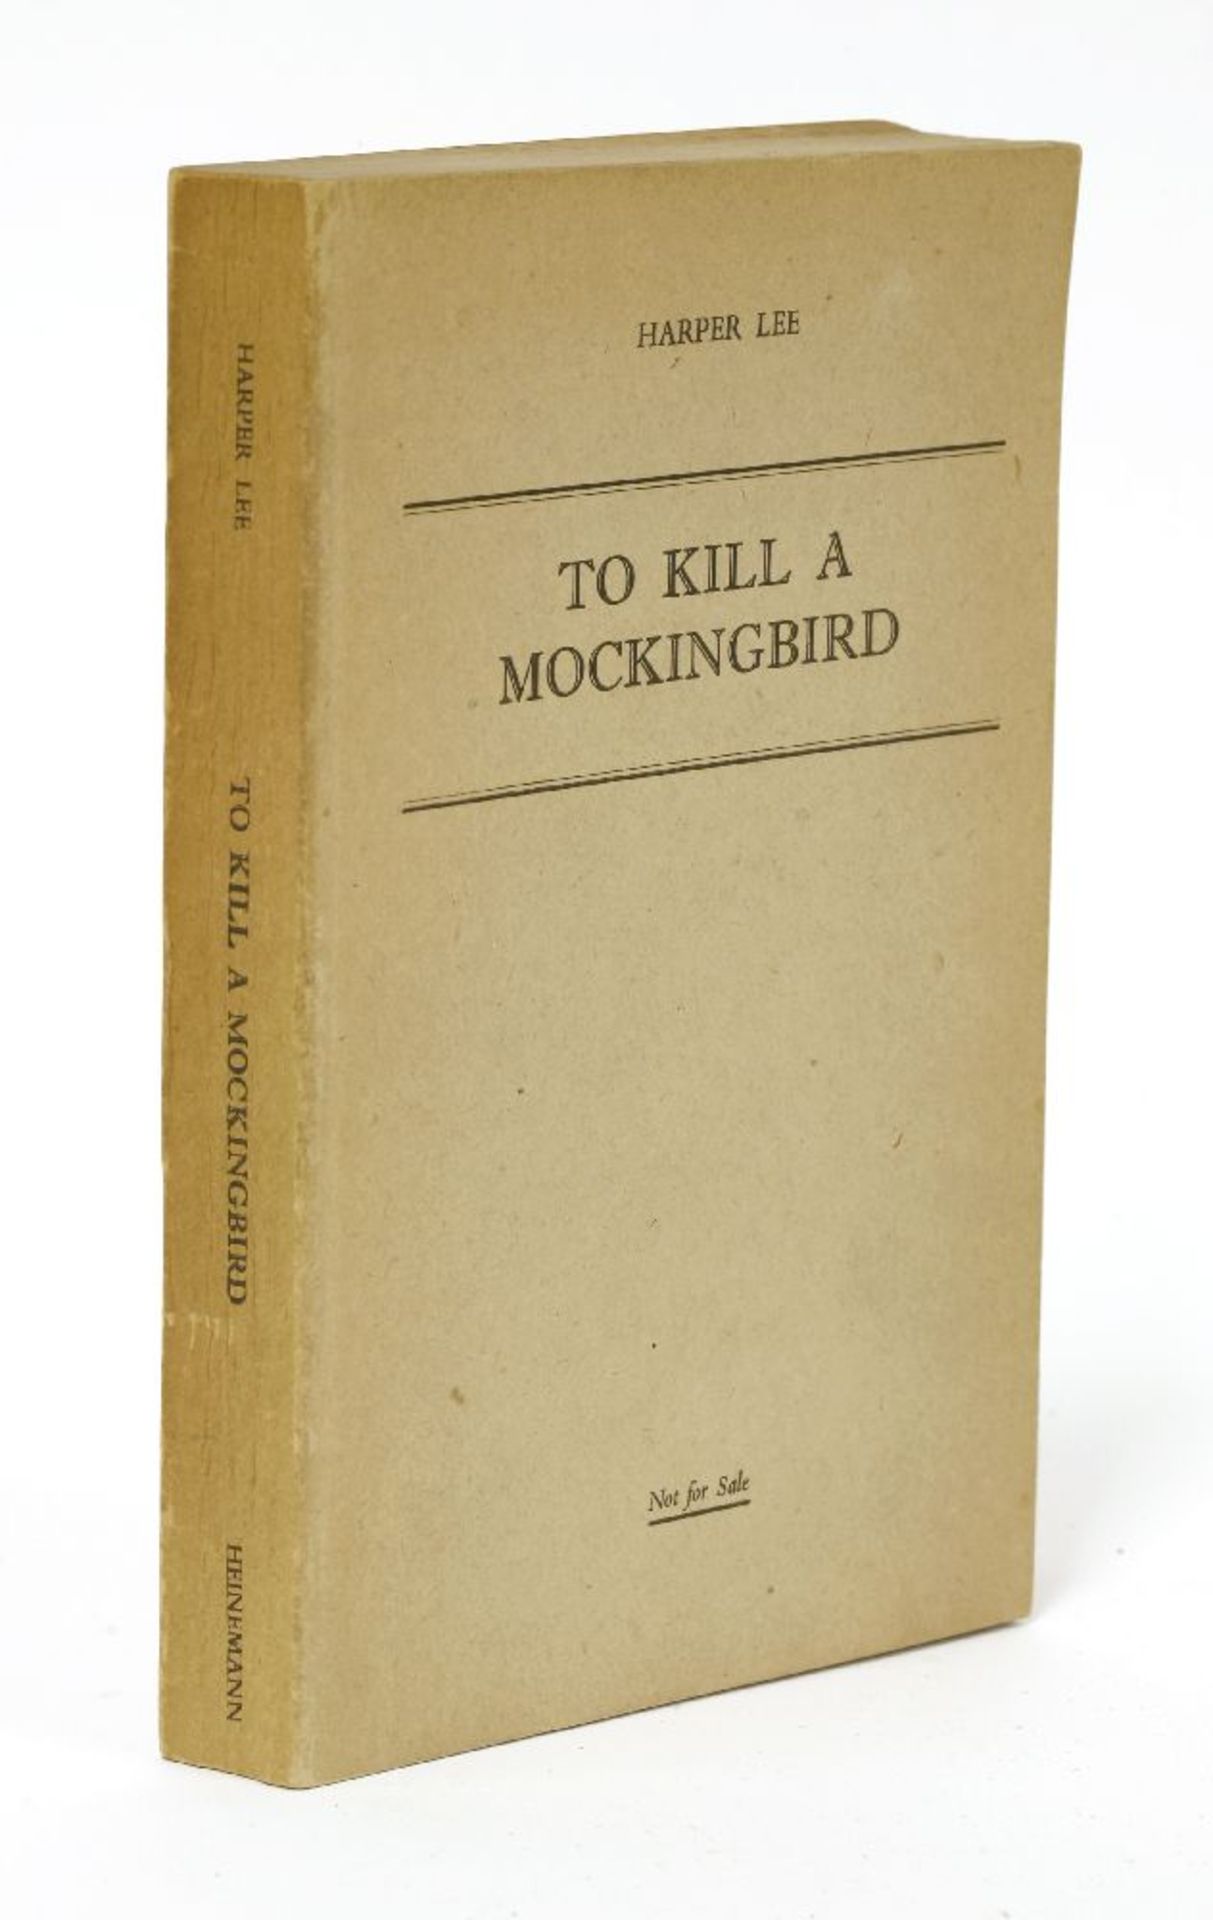 PROOF COPY- LEE, Harper: TO KILL A MOCKINGBIRD. L, Heinemann, 1960, Proof copy of the First edition,